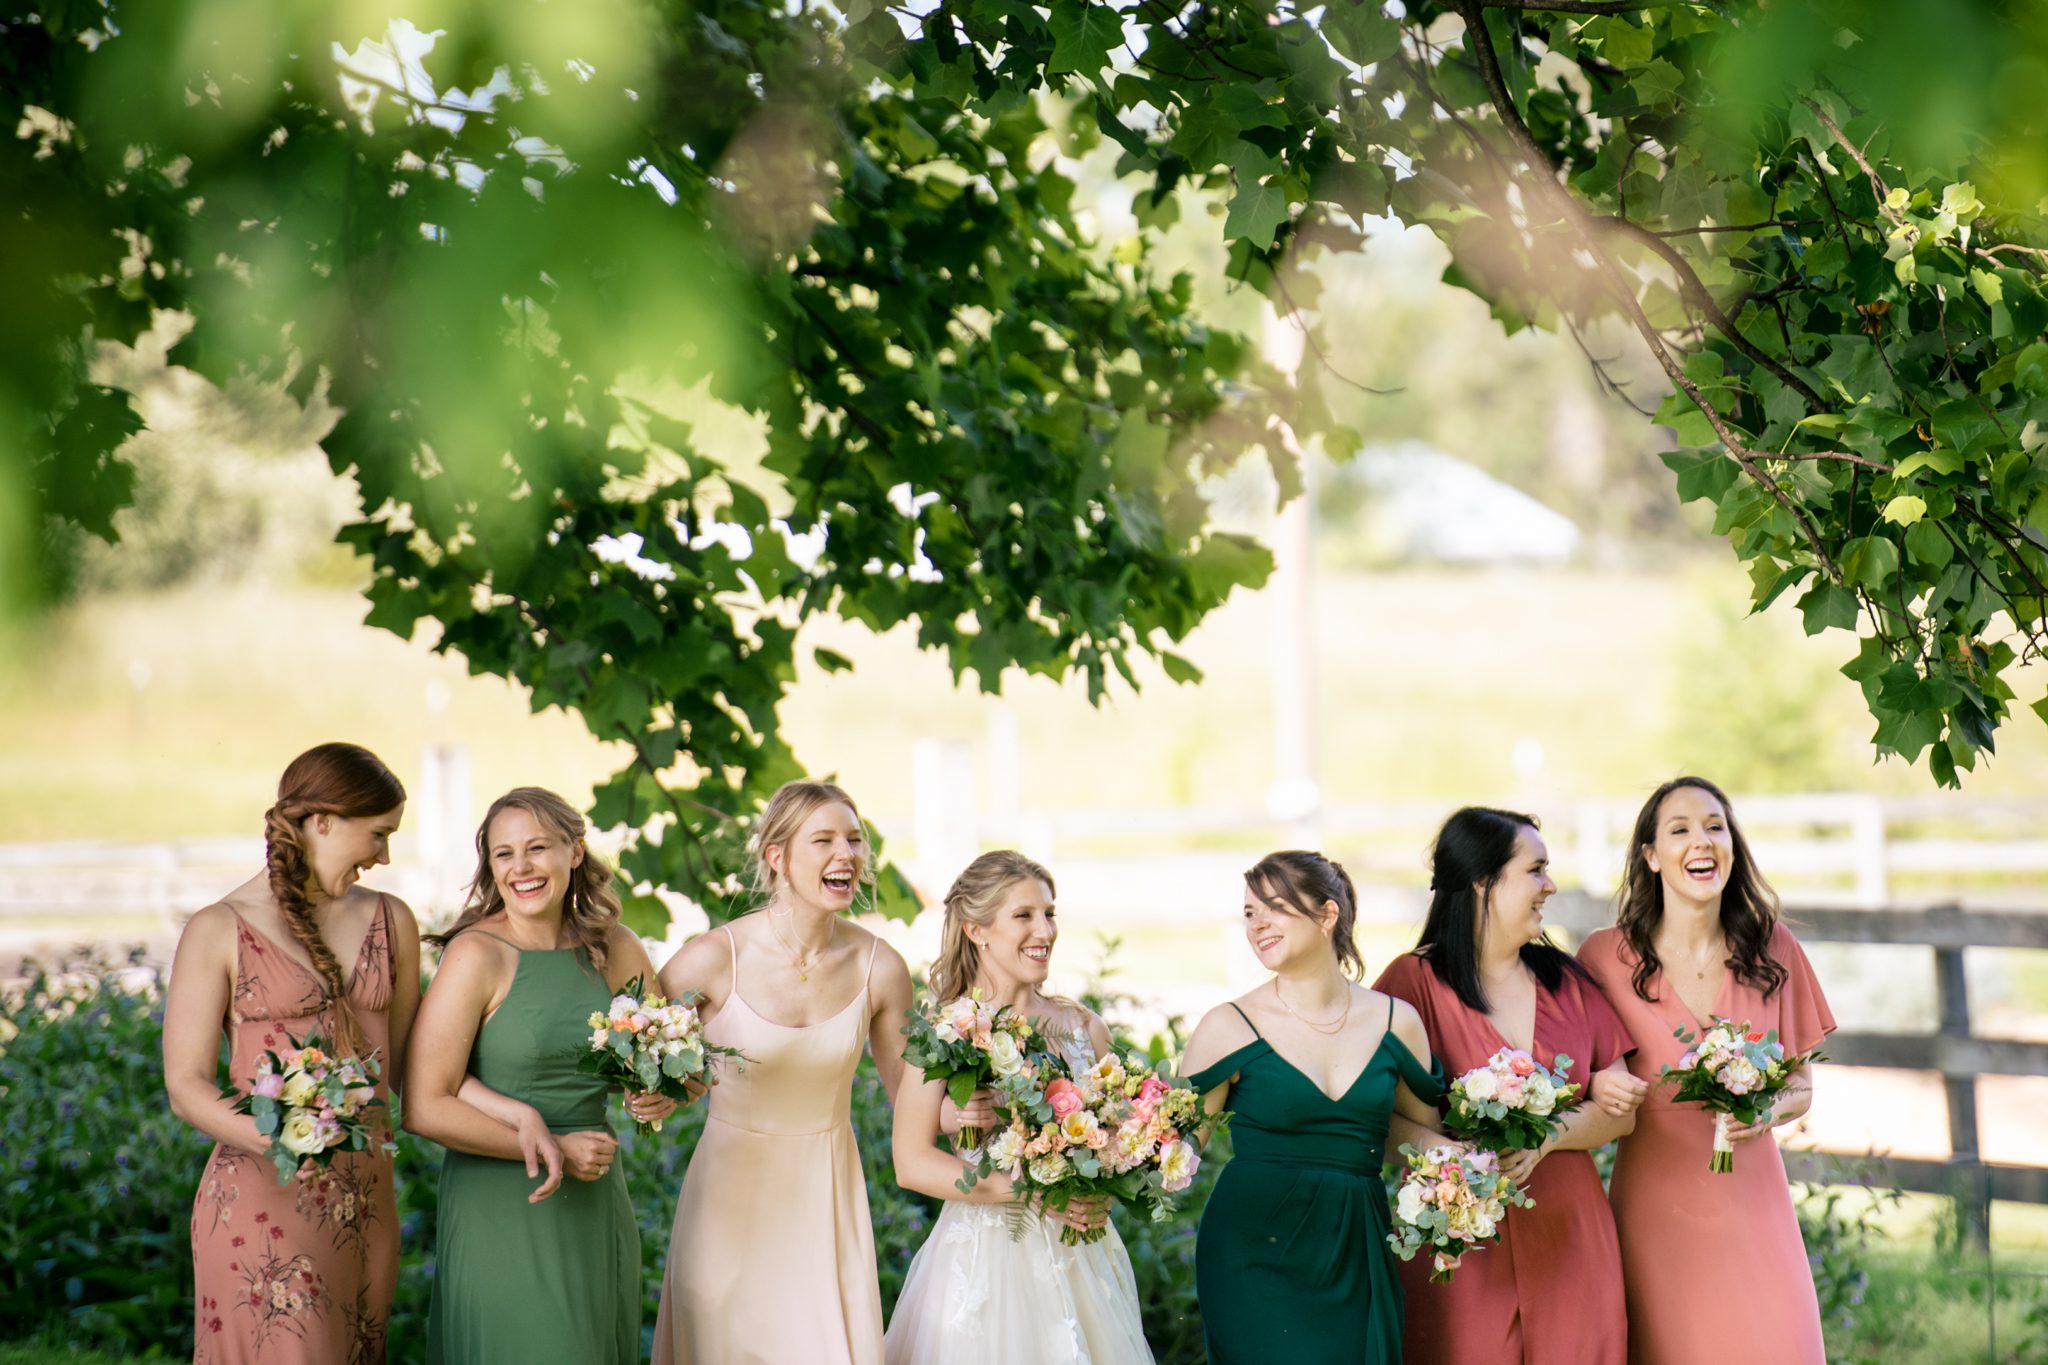 Bridesmaids strolling under a majestic oak tree at The Farm, a charming farm wedding venue nestled in Candler, NC